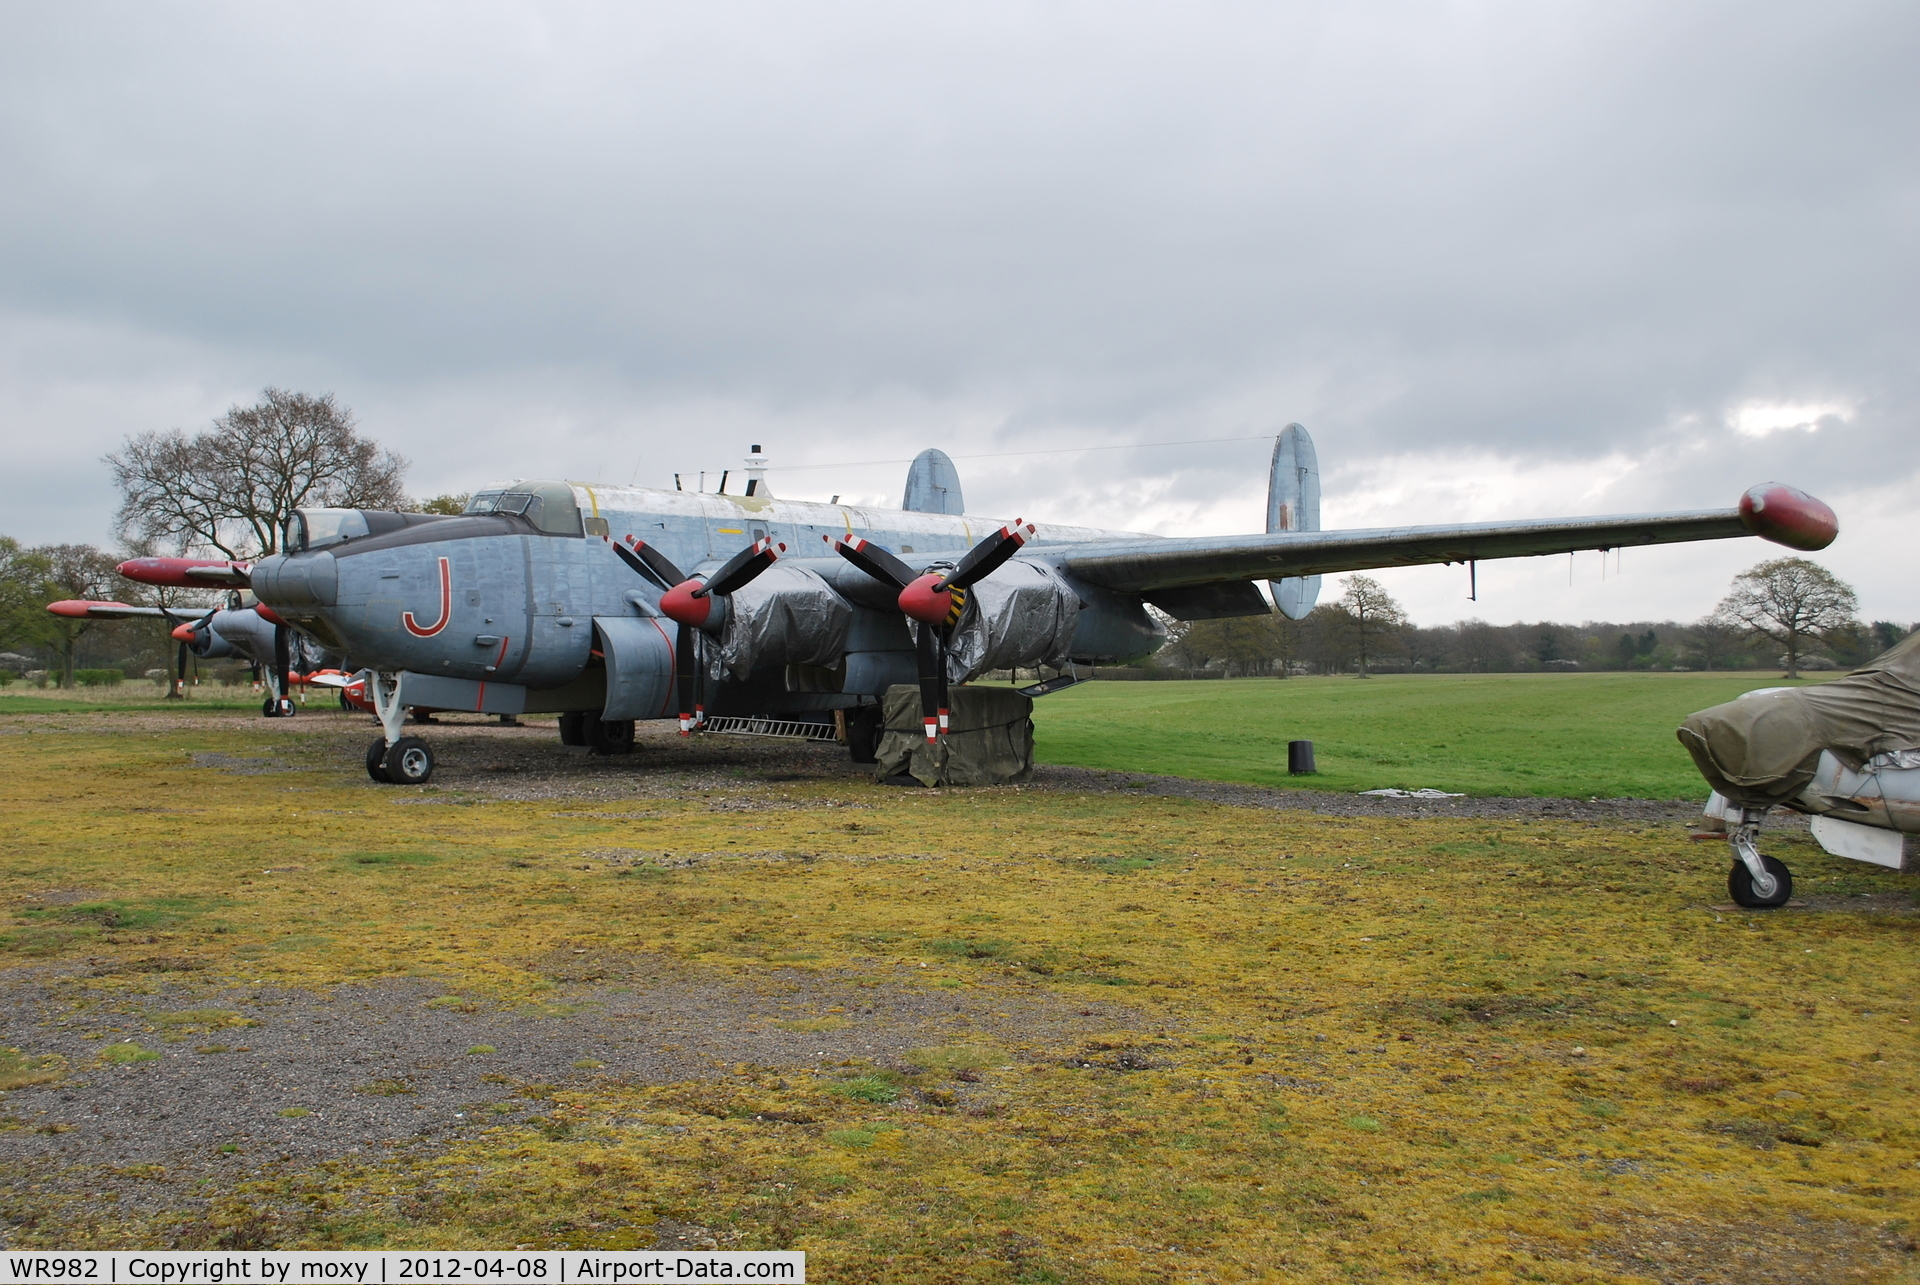 WR982, 1958 Avro 716 Shackleton MR.3/3 C/N Not found WR982, Avro Shackleton MR.3 at the Gatwick Aviation Museum